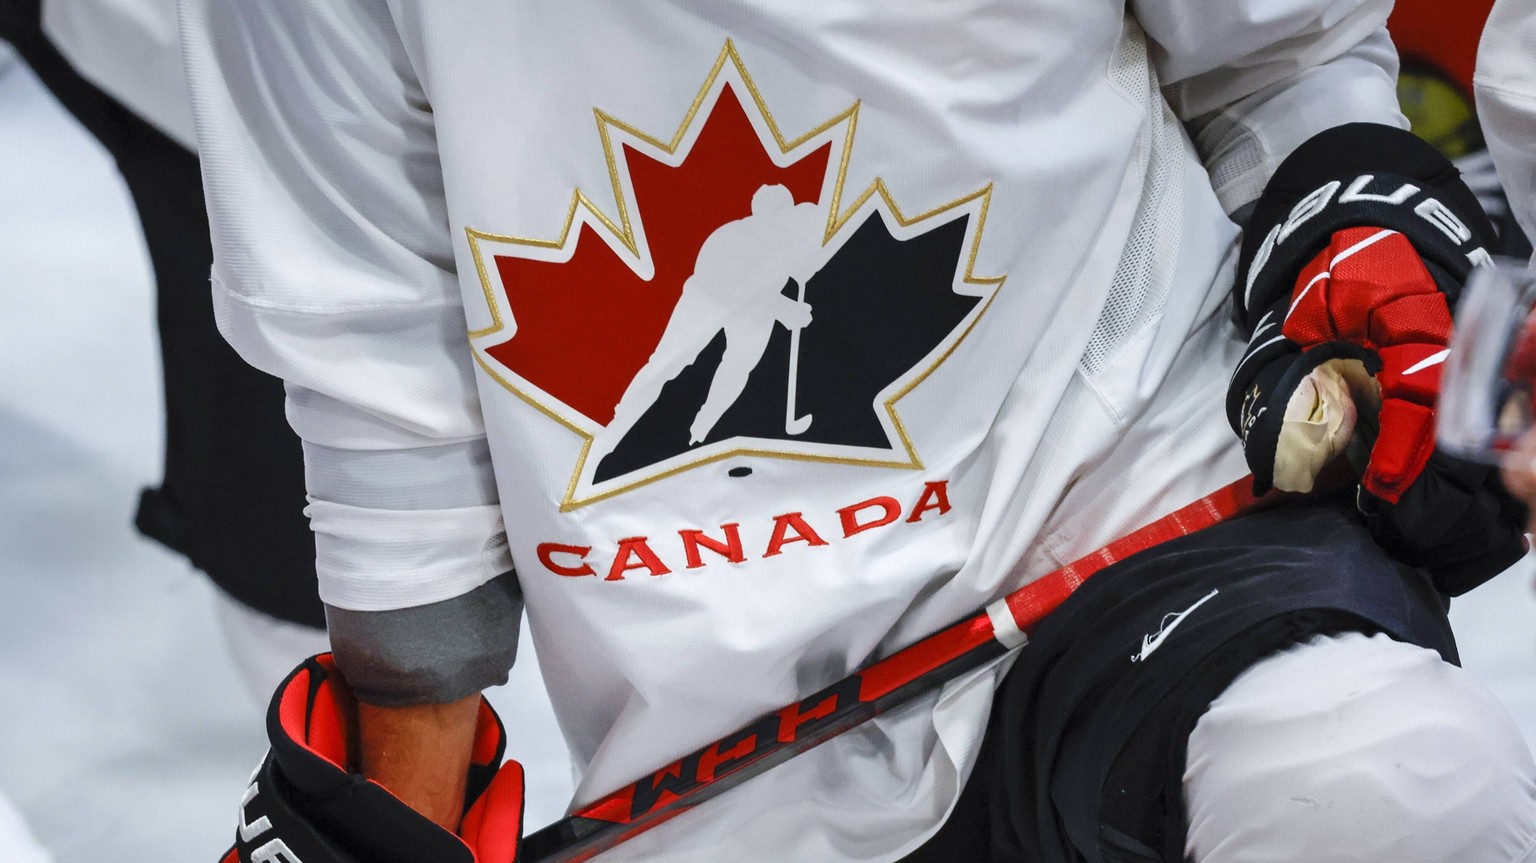 August 2, 2022, Calgary, AB, CANADA: A Hockey Canada logo is shown on the jersey of a player with CanadaöÄÃ s National Junior Team during a training camp practice in Calgary, Tuesday, Aug. 2, 2022. Ca ...